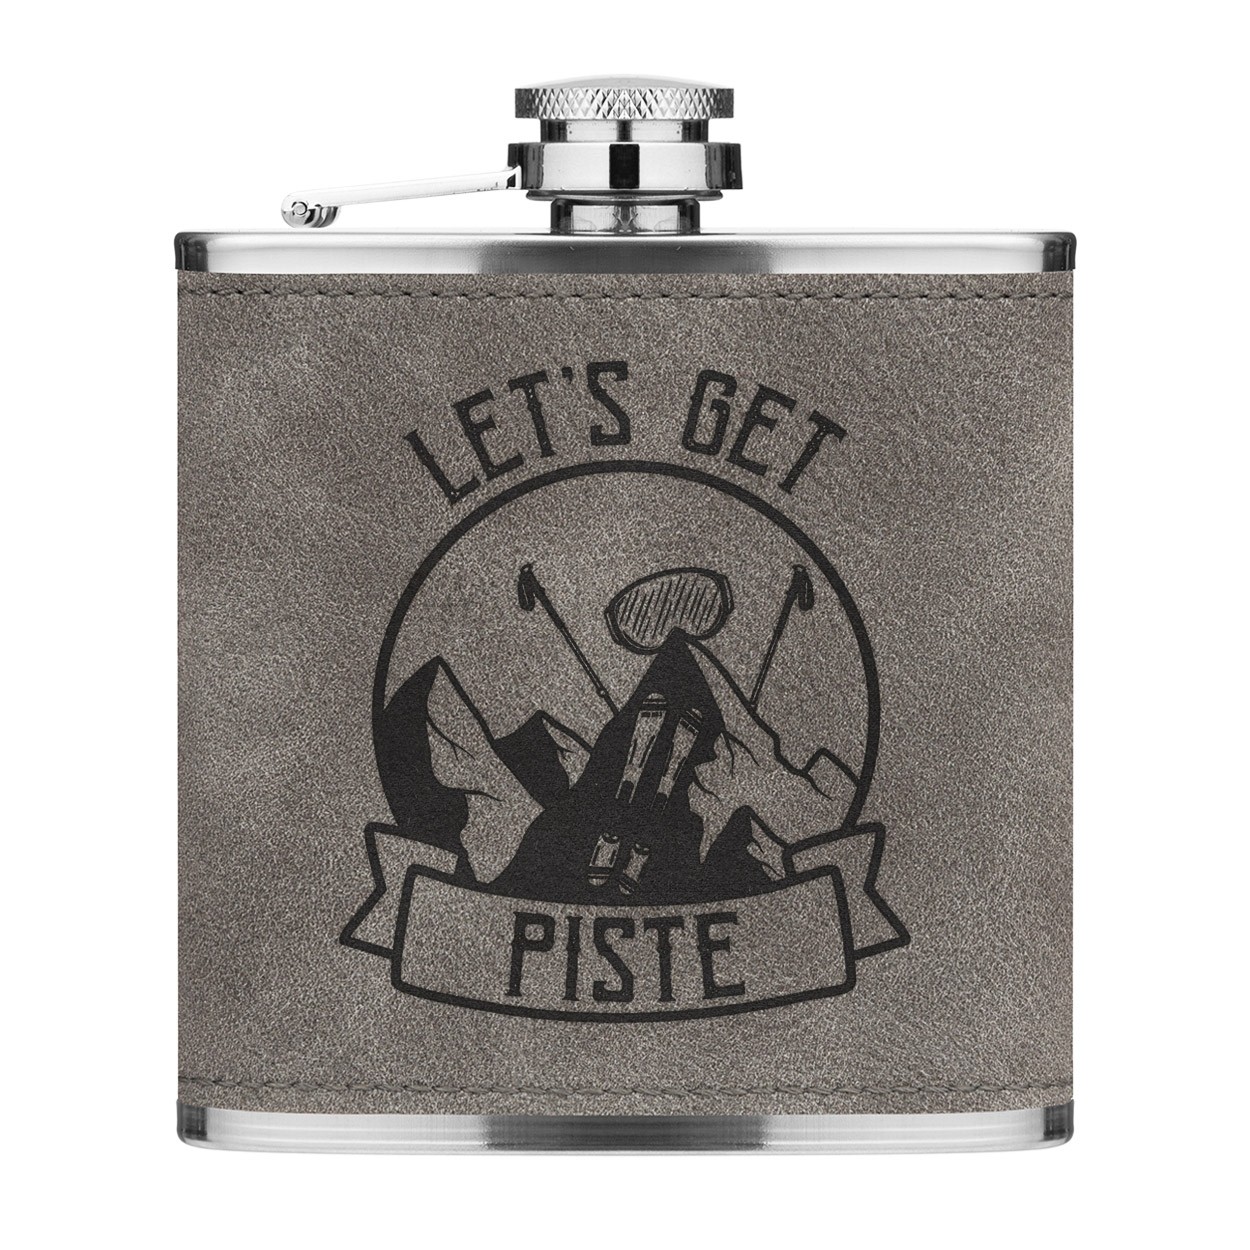 Let's Get Piste Pissed Skiing 6oz PU Leather Hip Flask Grey Luxe